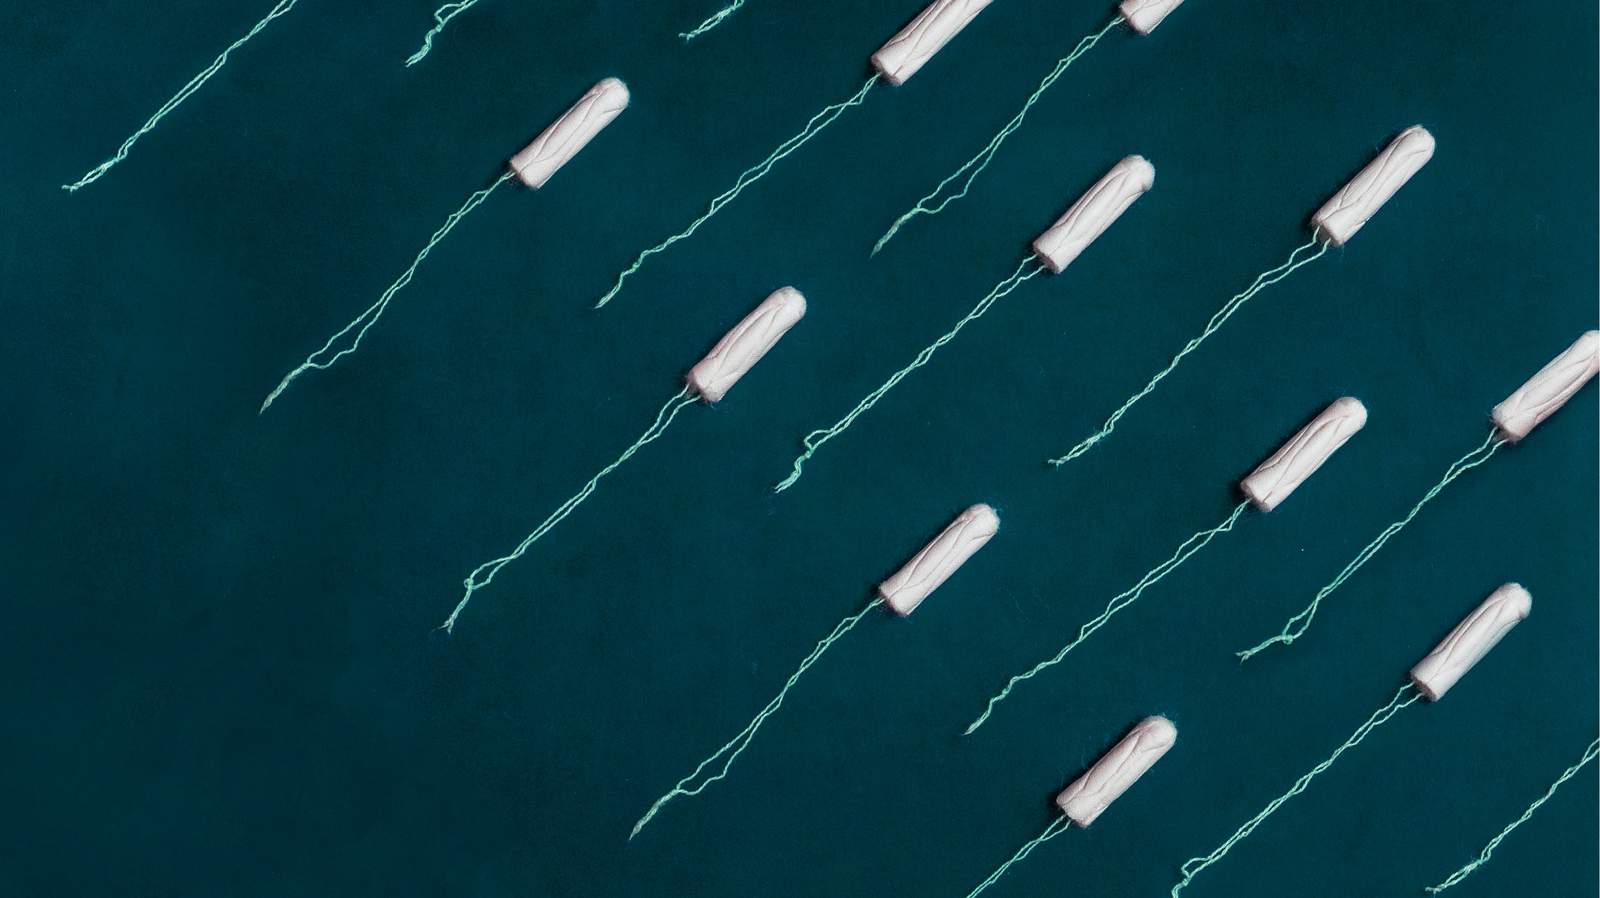 Michigan women seek $27M refund from state in tampon tax lawsuit